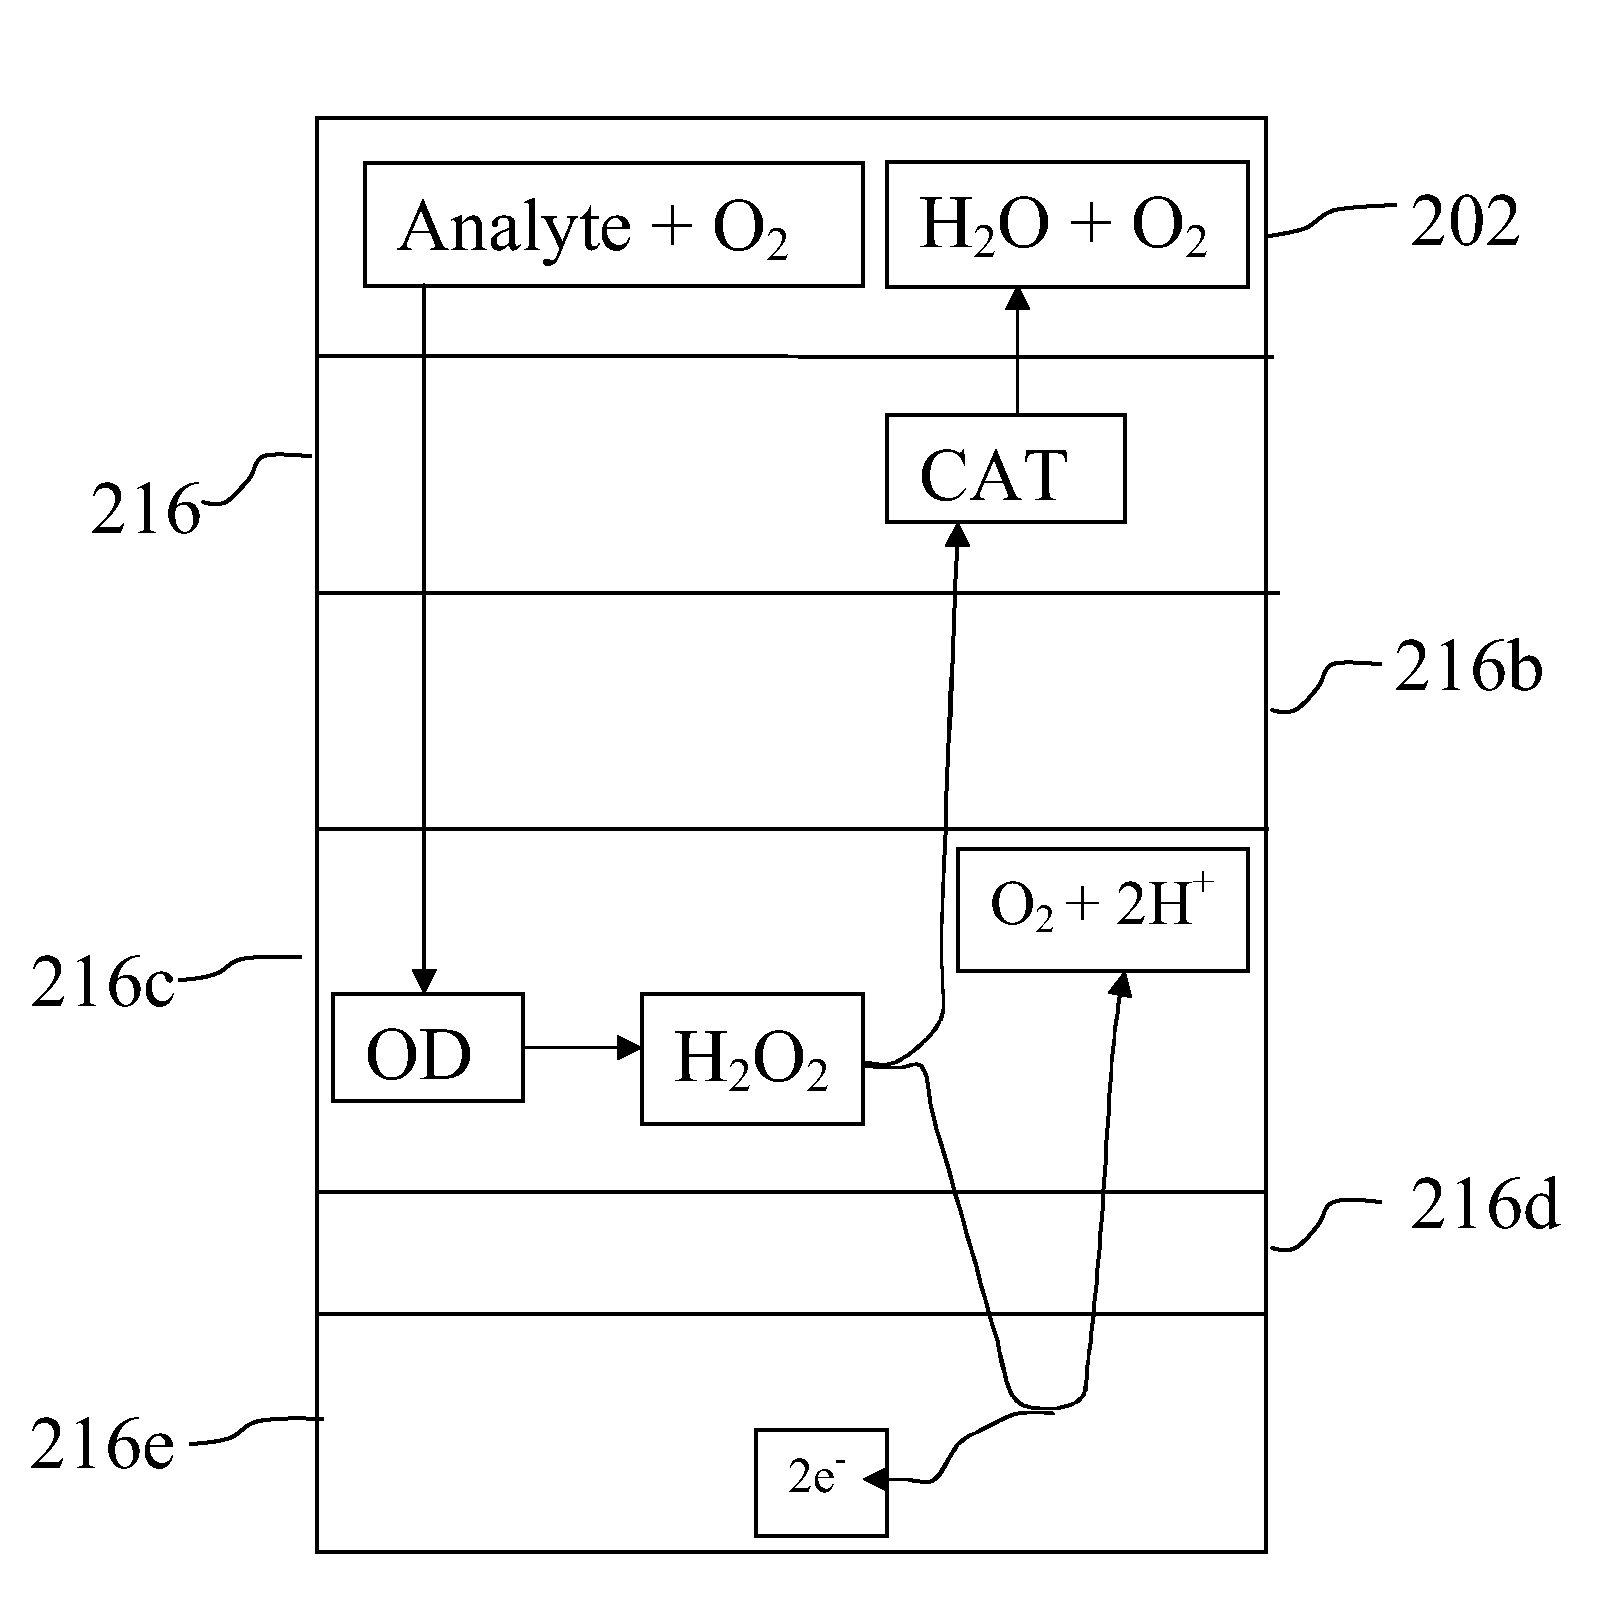 Sensor Arrangement for Continuously Monitoring Analytes in a Biological Fluid